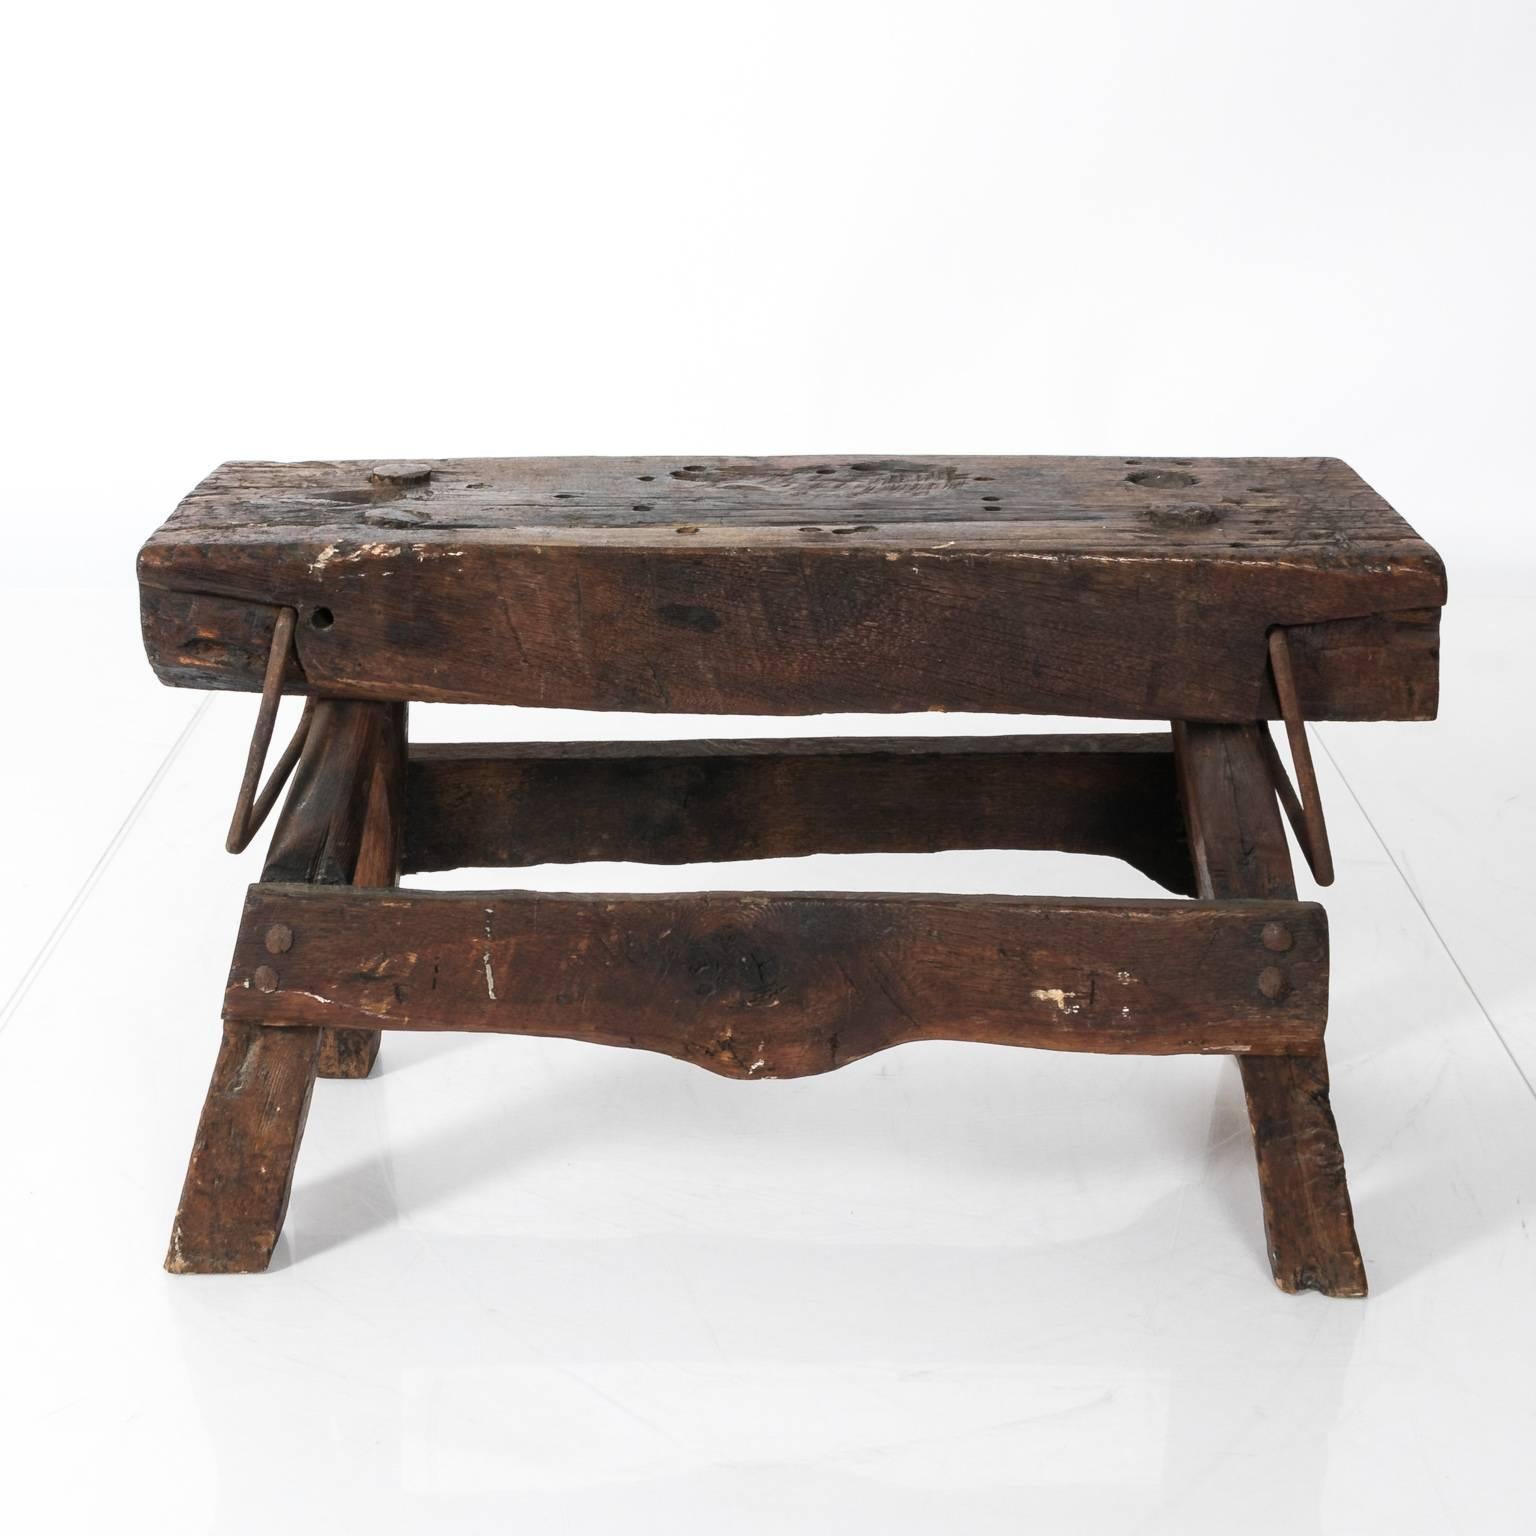 Utilitarian wooden bench used by Tanners in their workshop, circa late 18th century.
 